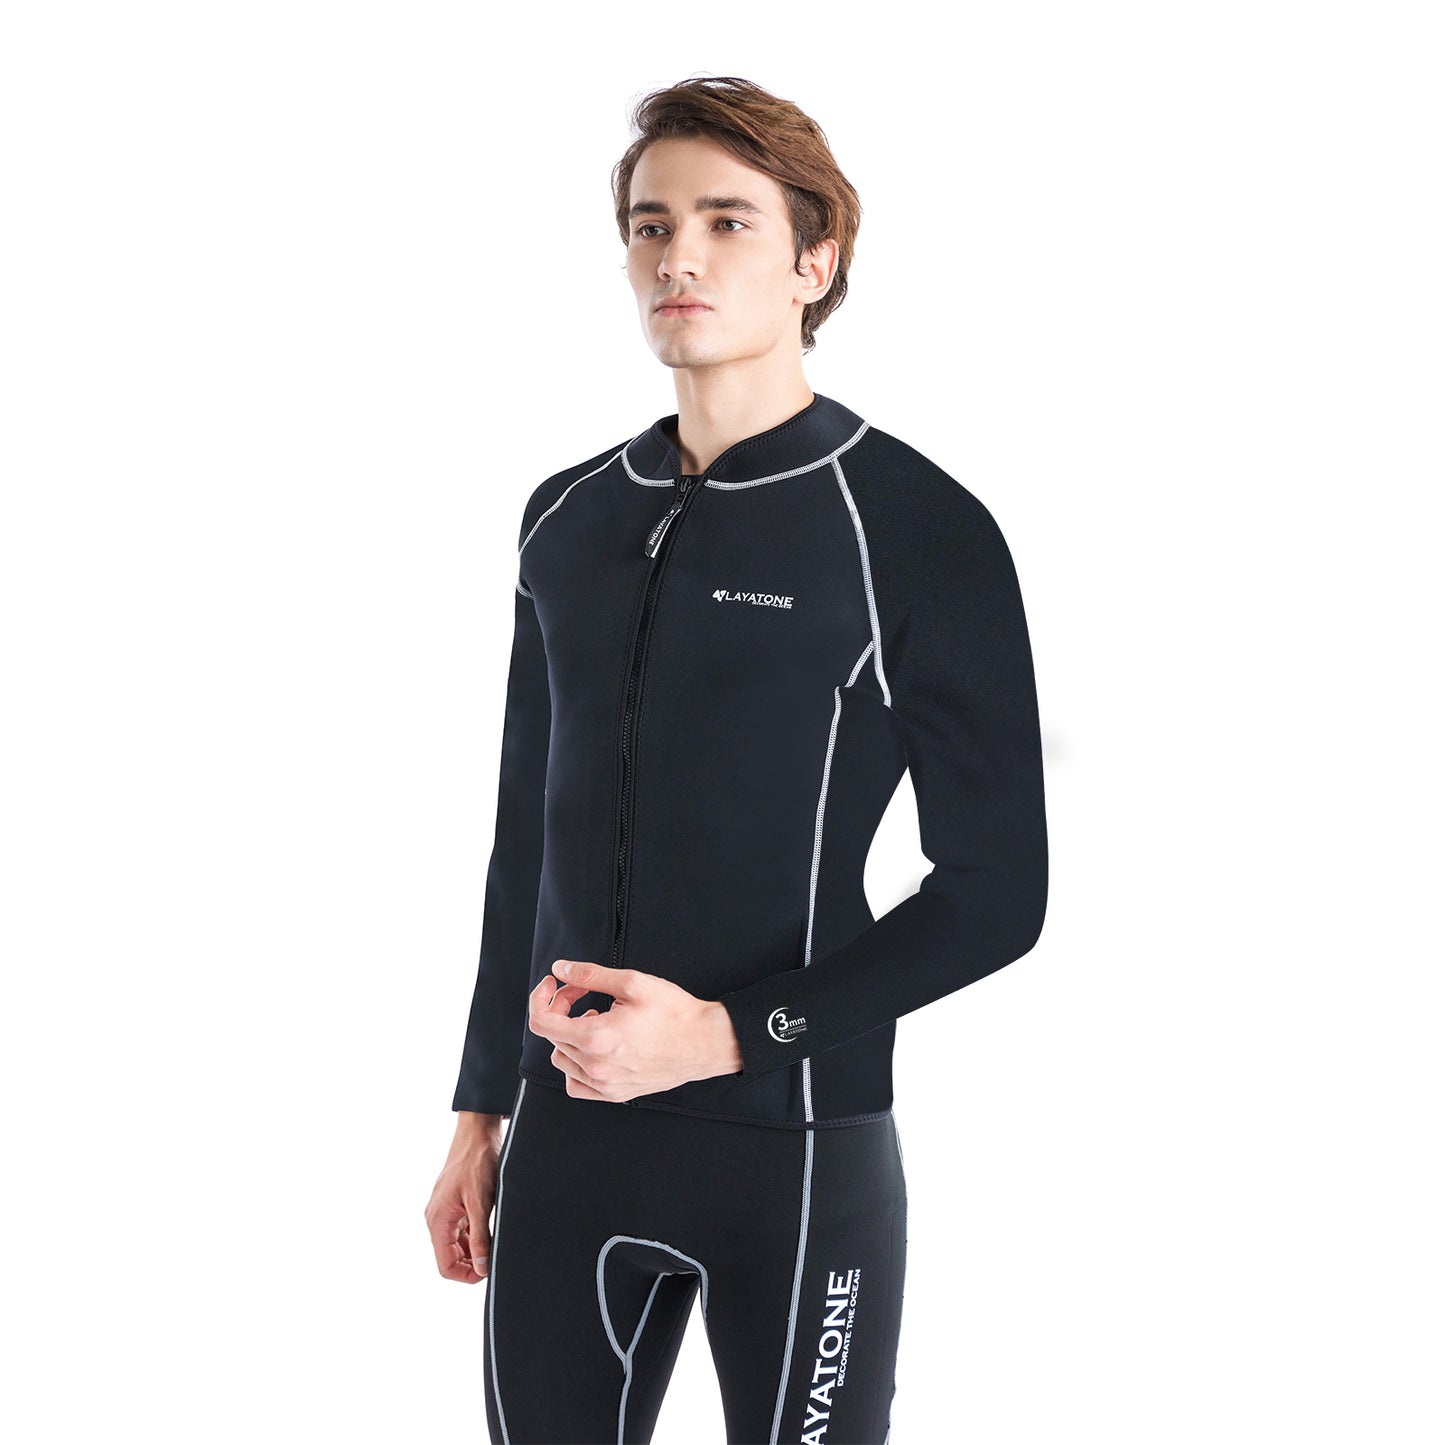 LAYATONE Mens Wetsuit Top Jacket 2mm or 3mm - Neoprene Long Sleeve for Warmth & Comfort- Surfing, Snorkeling, All Watersports - w/Extended Back Flap and Durable YKK Locking Front Zipper